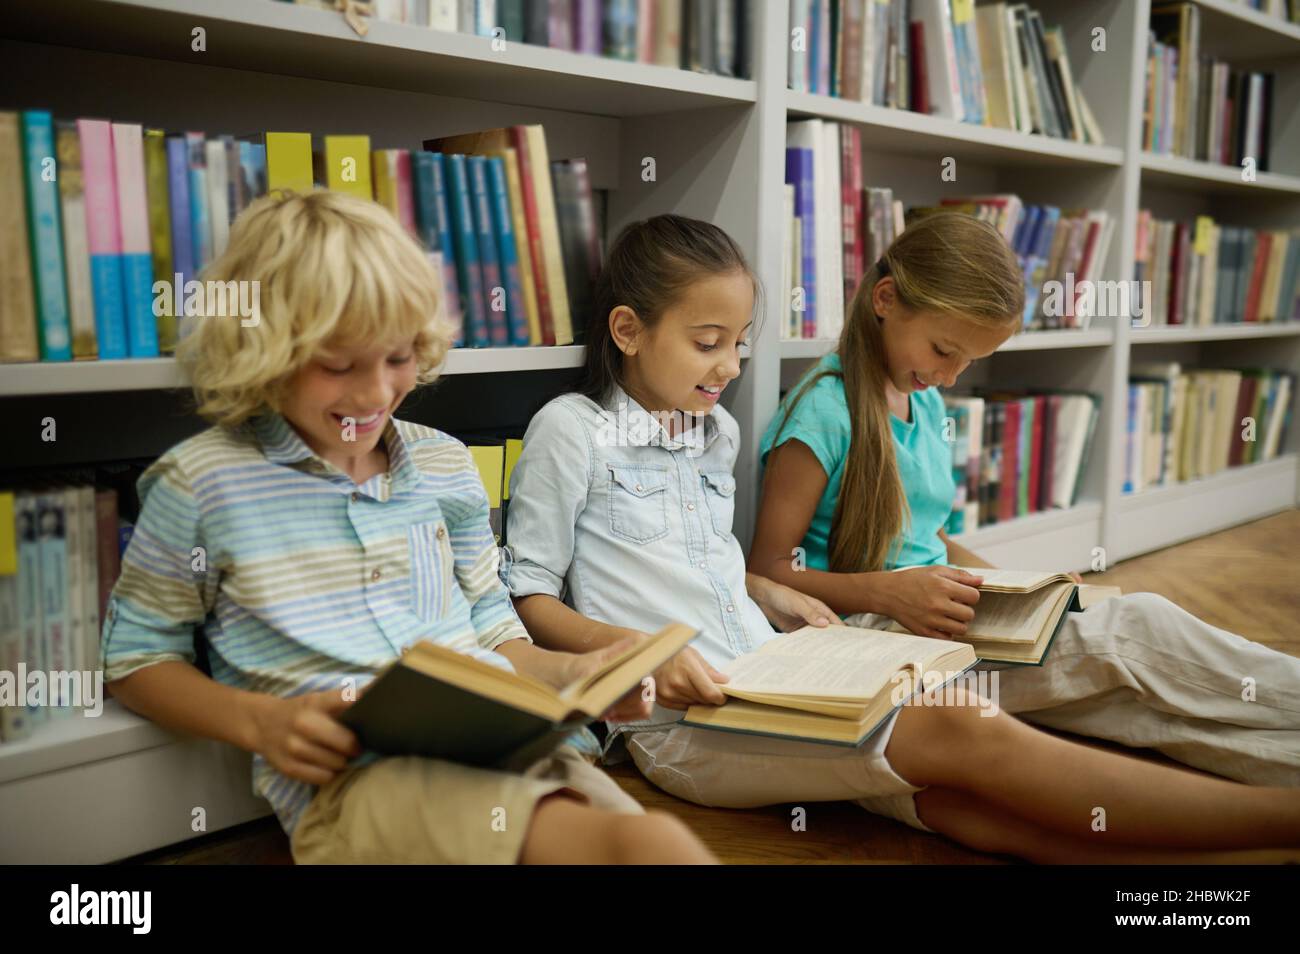 Boy and two girls sitting on floor reading books Stock Photo